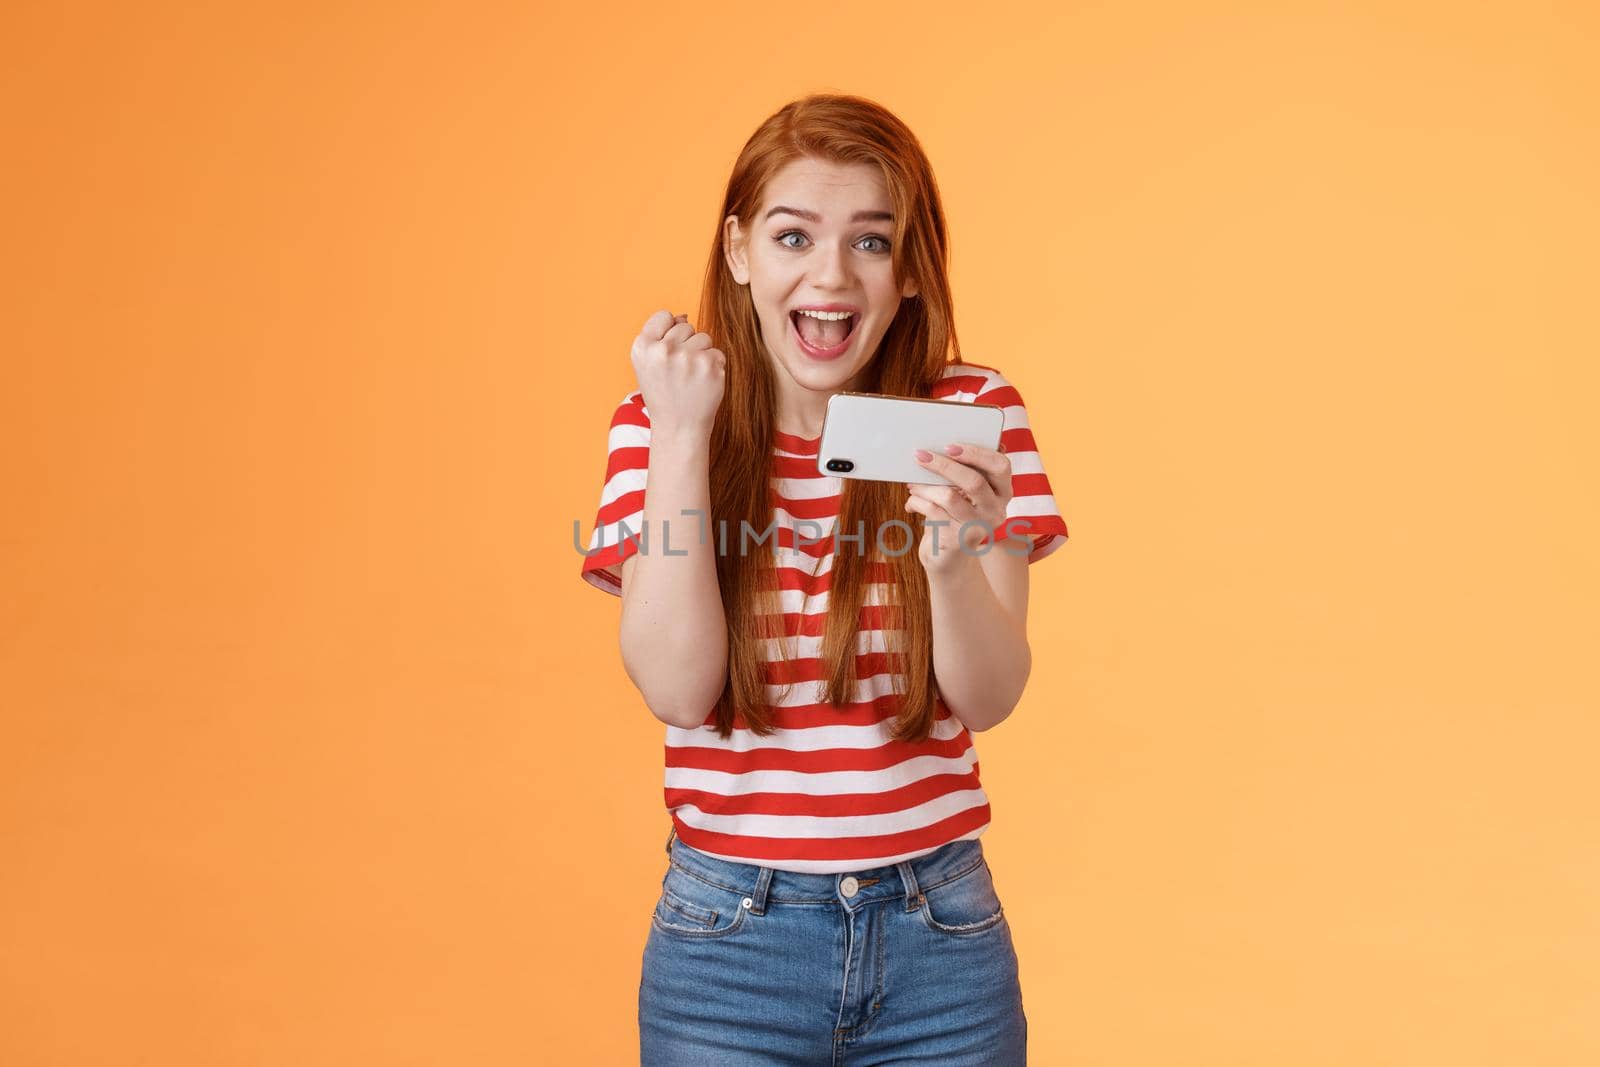 Happy excited redhead female pass level, like awesome game, score goal, hold smartphone horizontally, fist pump success, celebrate lucky achievement, smiling broadly, orange background.